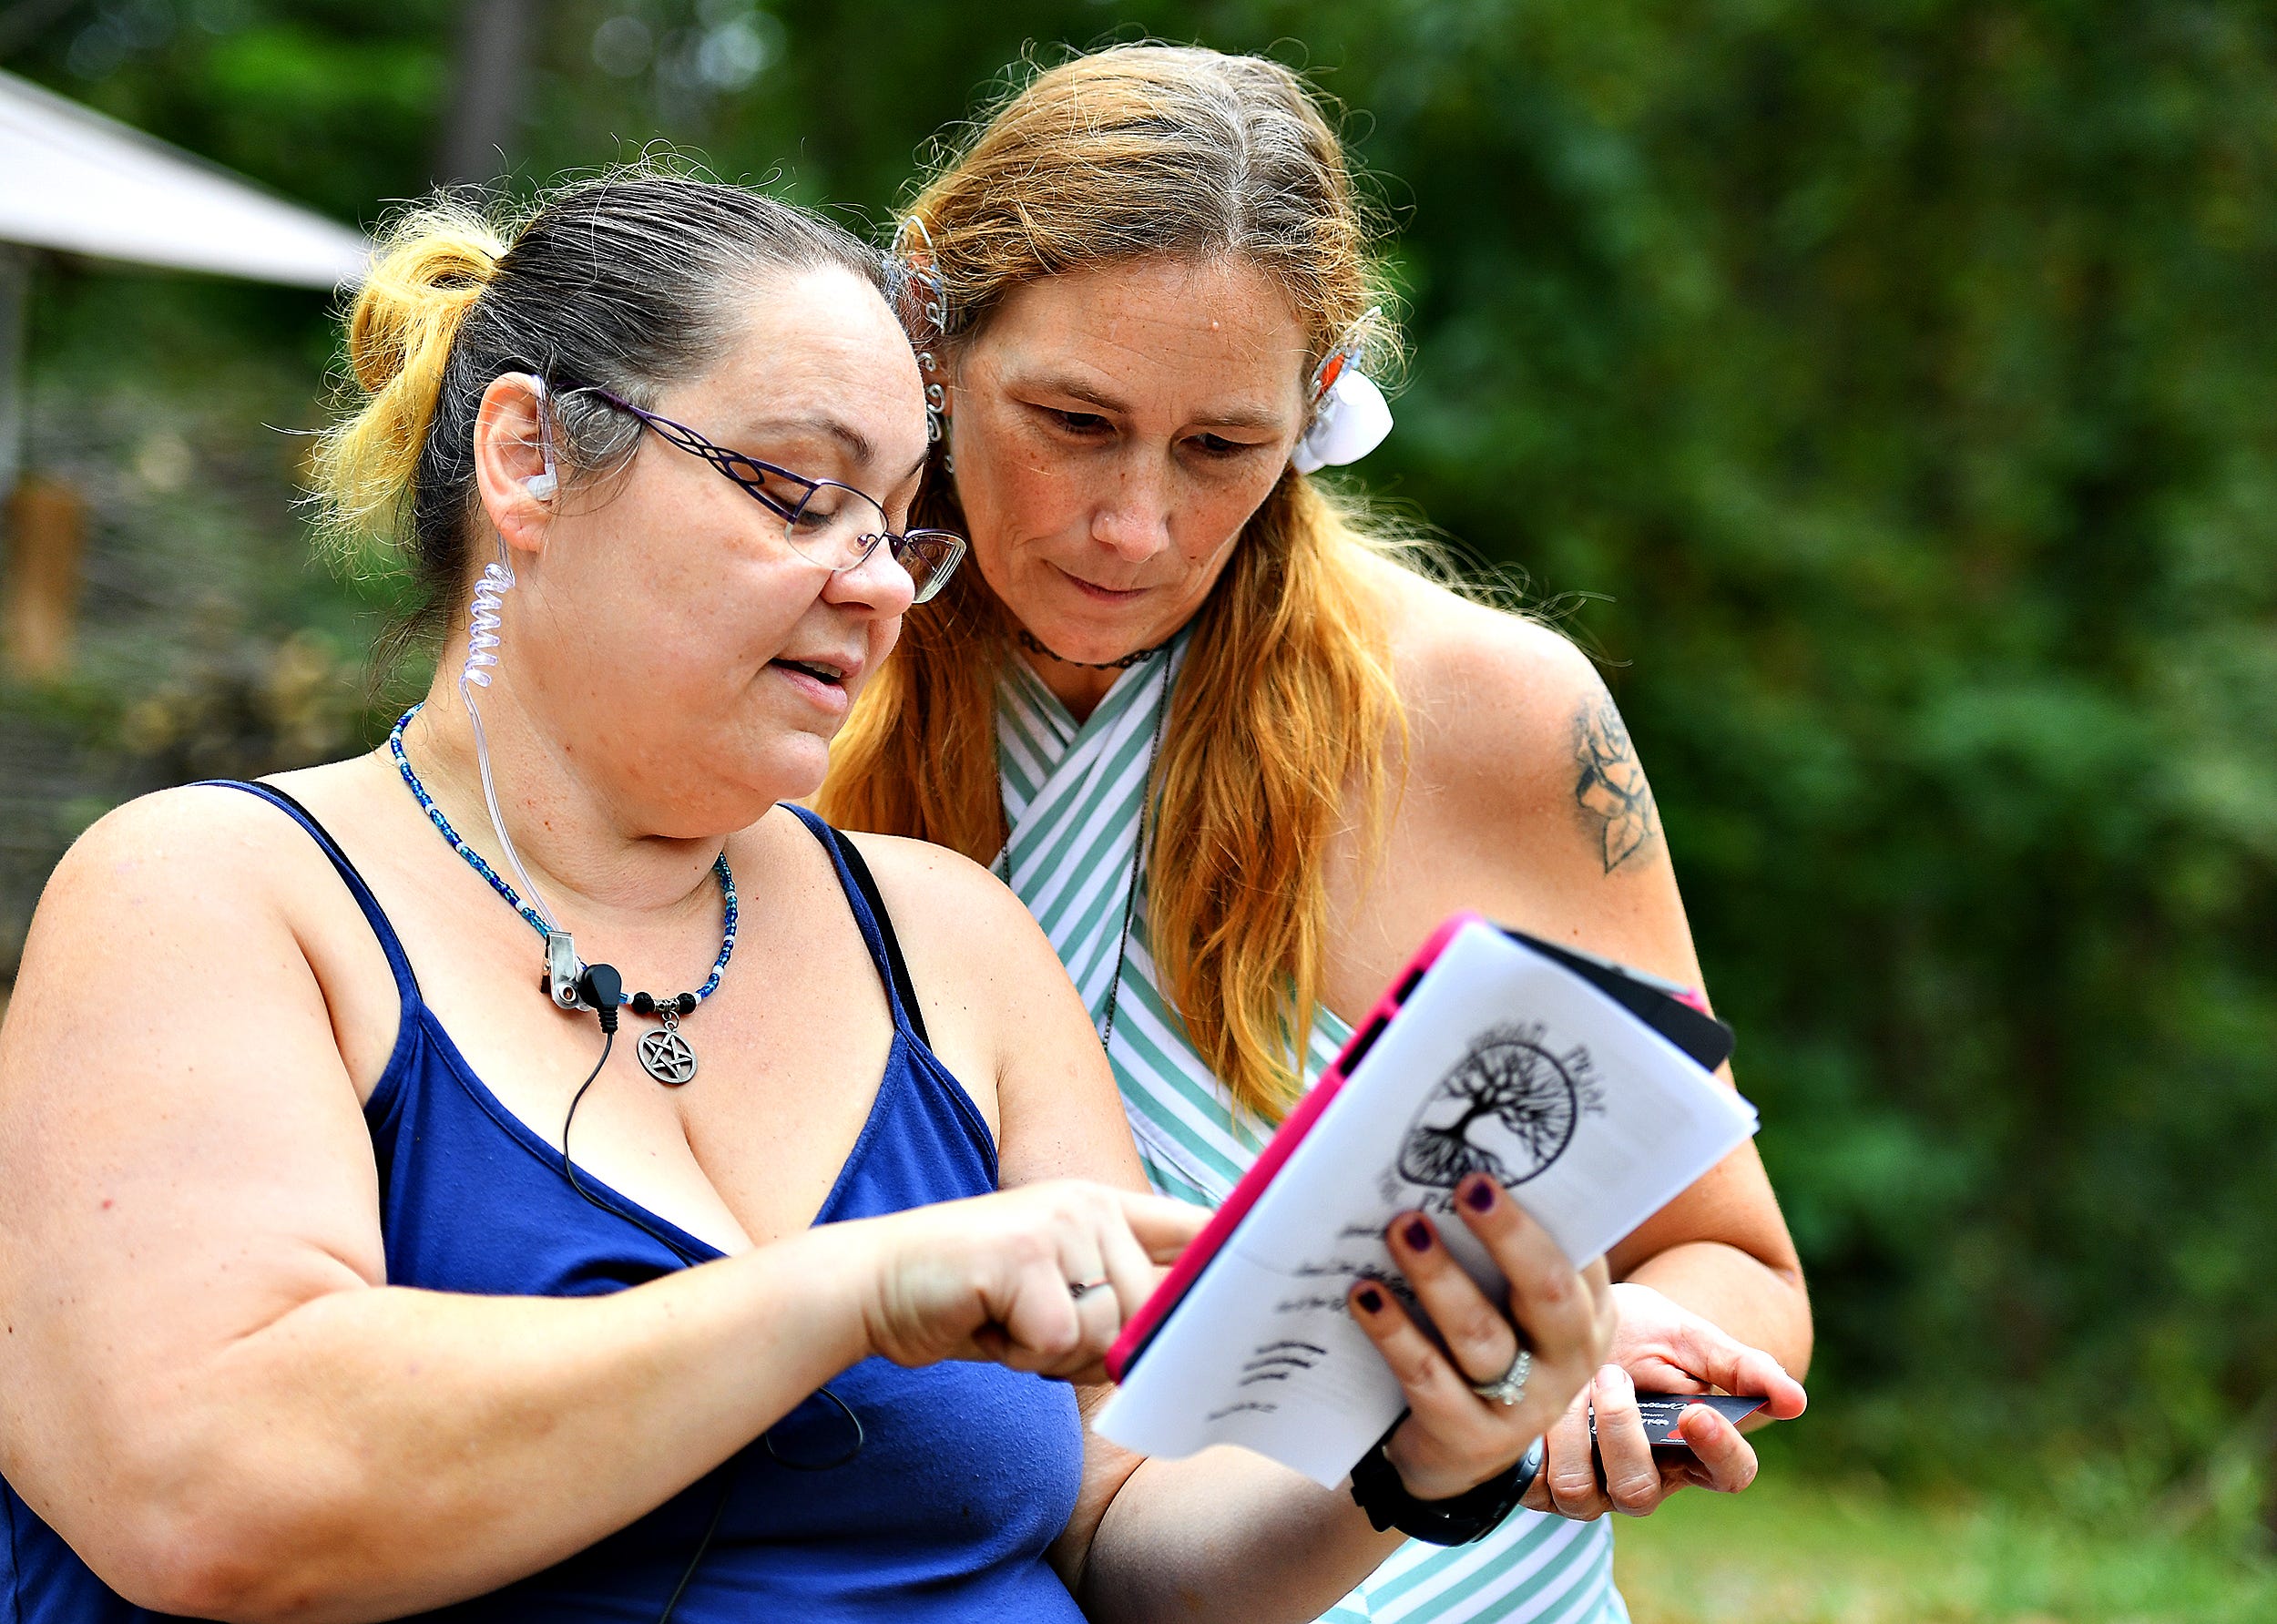 Event organizer Sabrina Bowman, left, works with a volunteers during the 8th annual Pagan Pride Festival at Samuel S. Lewis State Park in Lower Windsor Township, Saturday, Sept. 28, 2019. Dawn J. Sagert photo